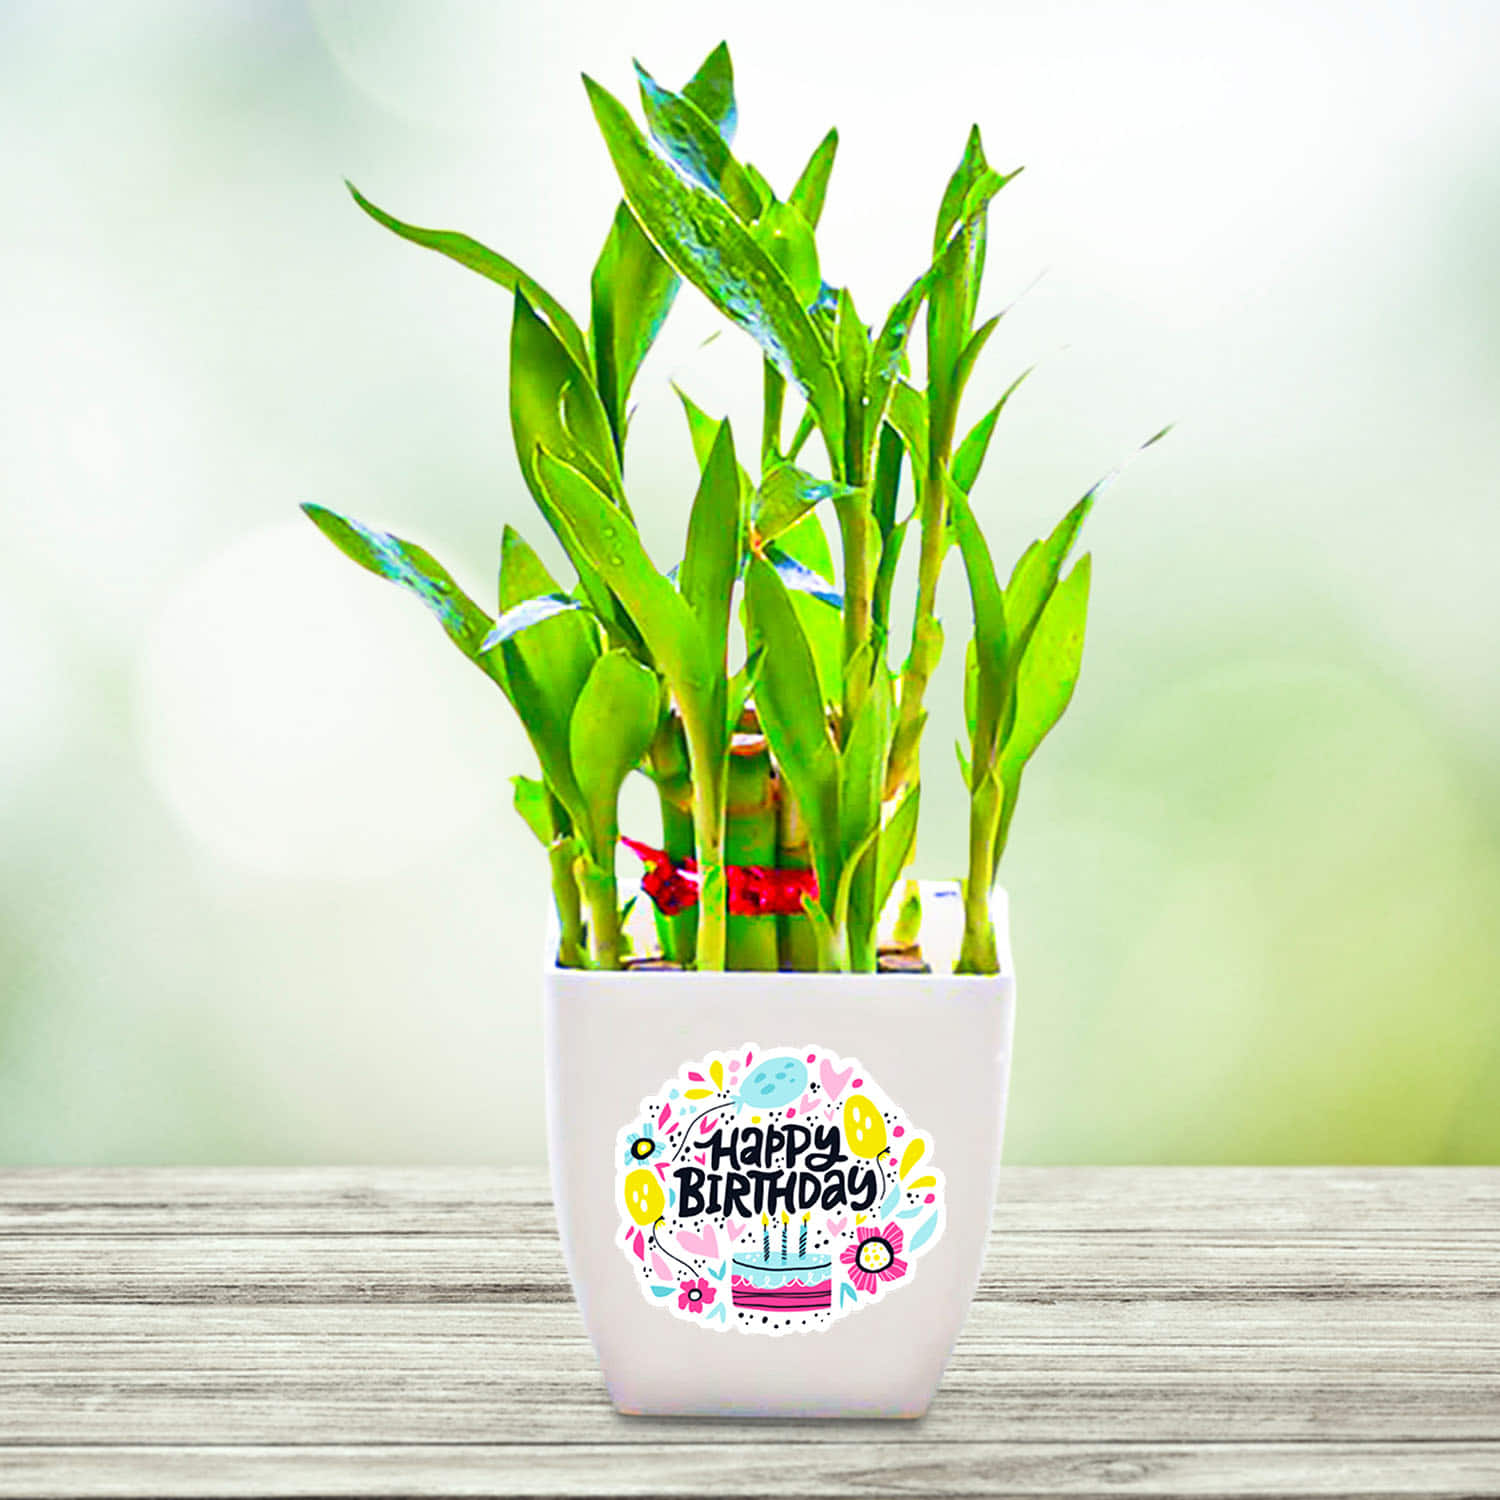 KS Bamboo plant gift in Self Watering Pots – KS ARTS COLLECTION